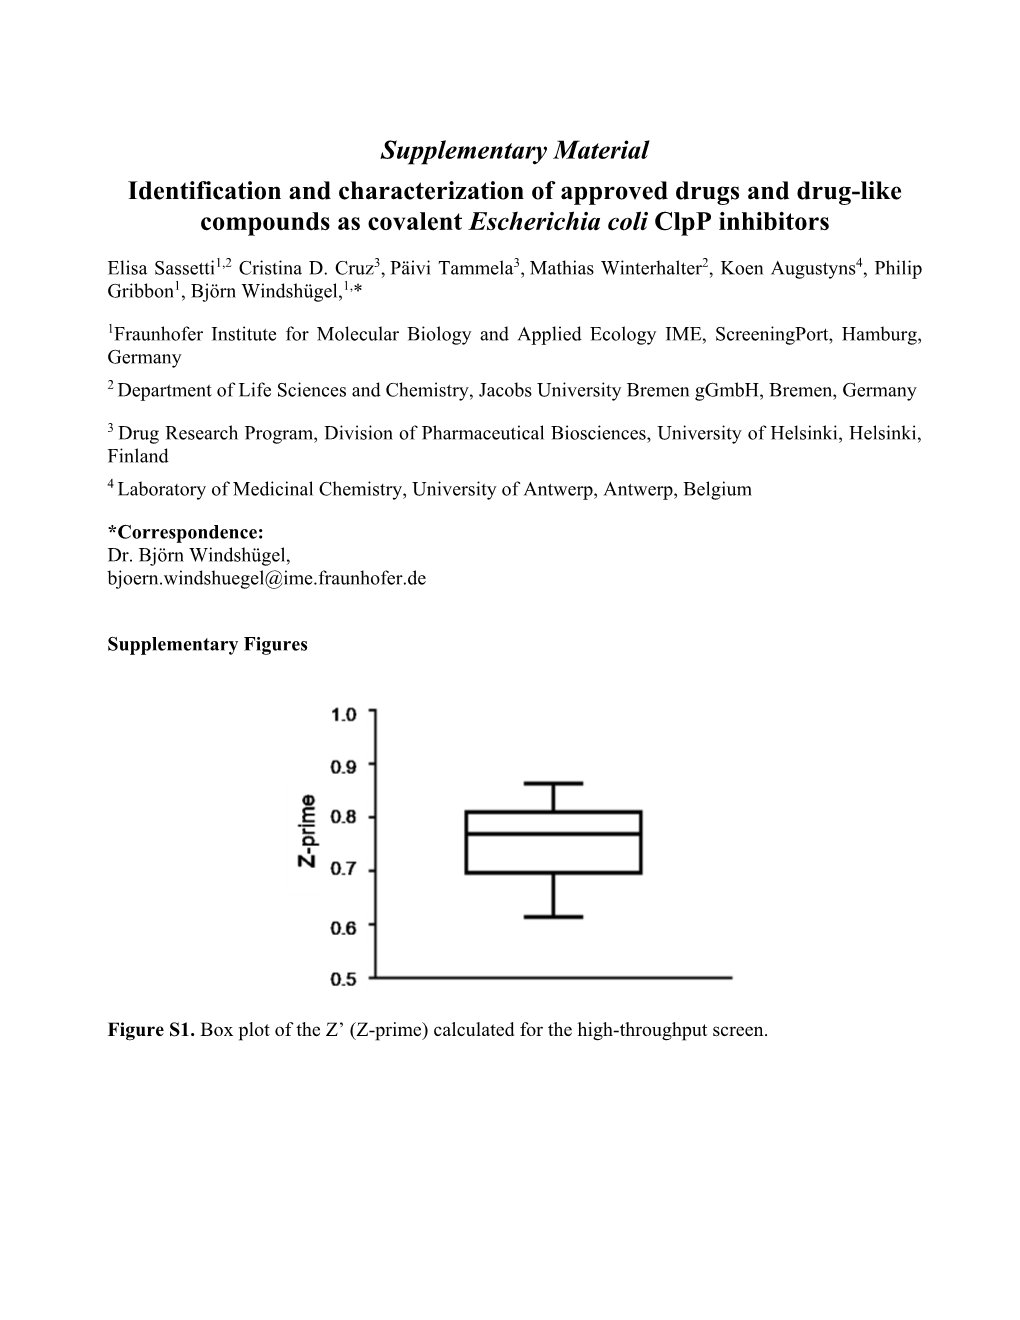 Supplementary Material Identification and Characterization of Approved Drugs and Drug-Like Compounds As Covalent Escherichia Coli Clpp Inhibitors